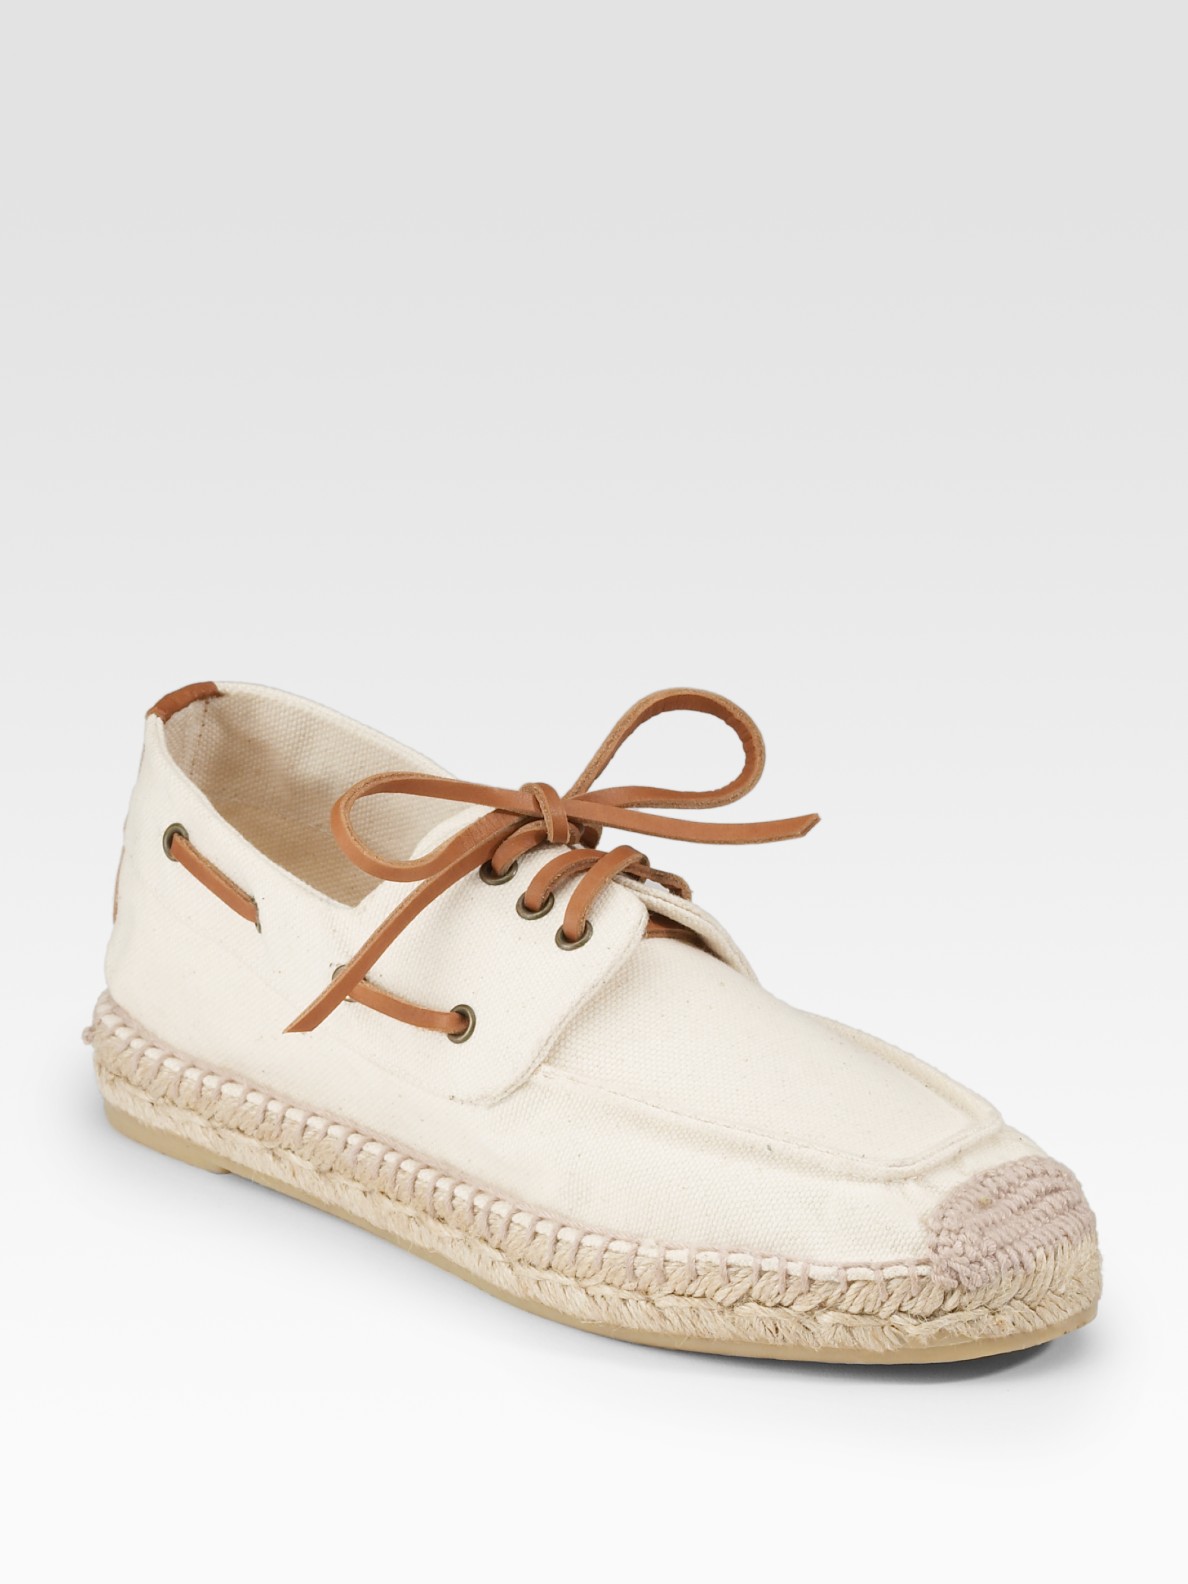 Lyst - Tory burch Top Sider Canvas Espadrilles in White